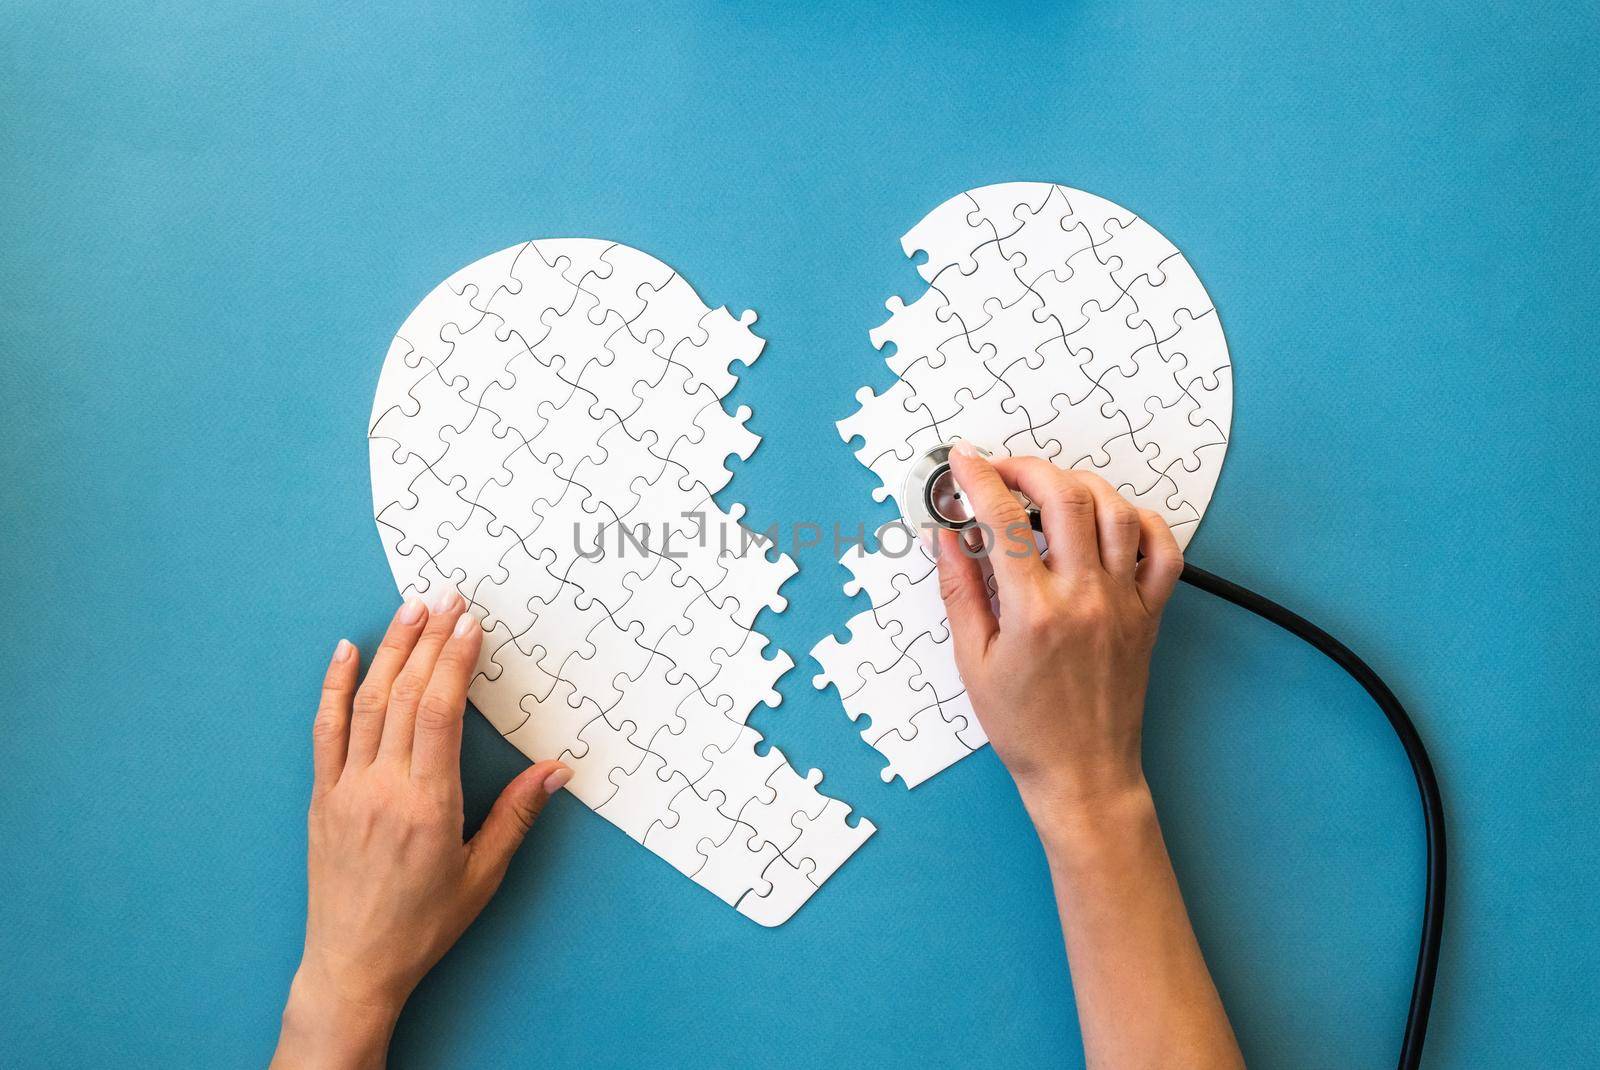 Hands with stethoscope and white puzzle in heart shape. White details of puzzle on blue background. Heart health concept.